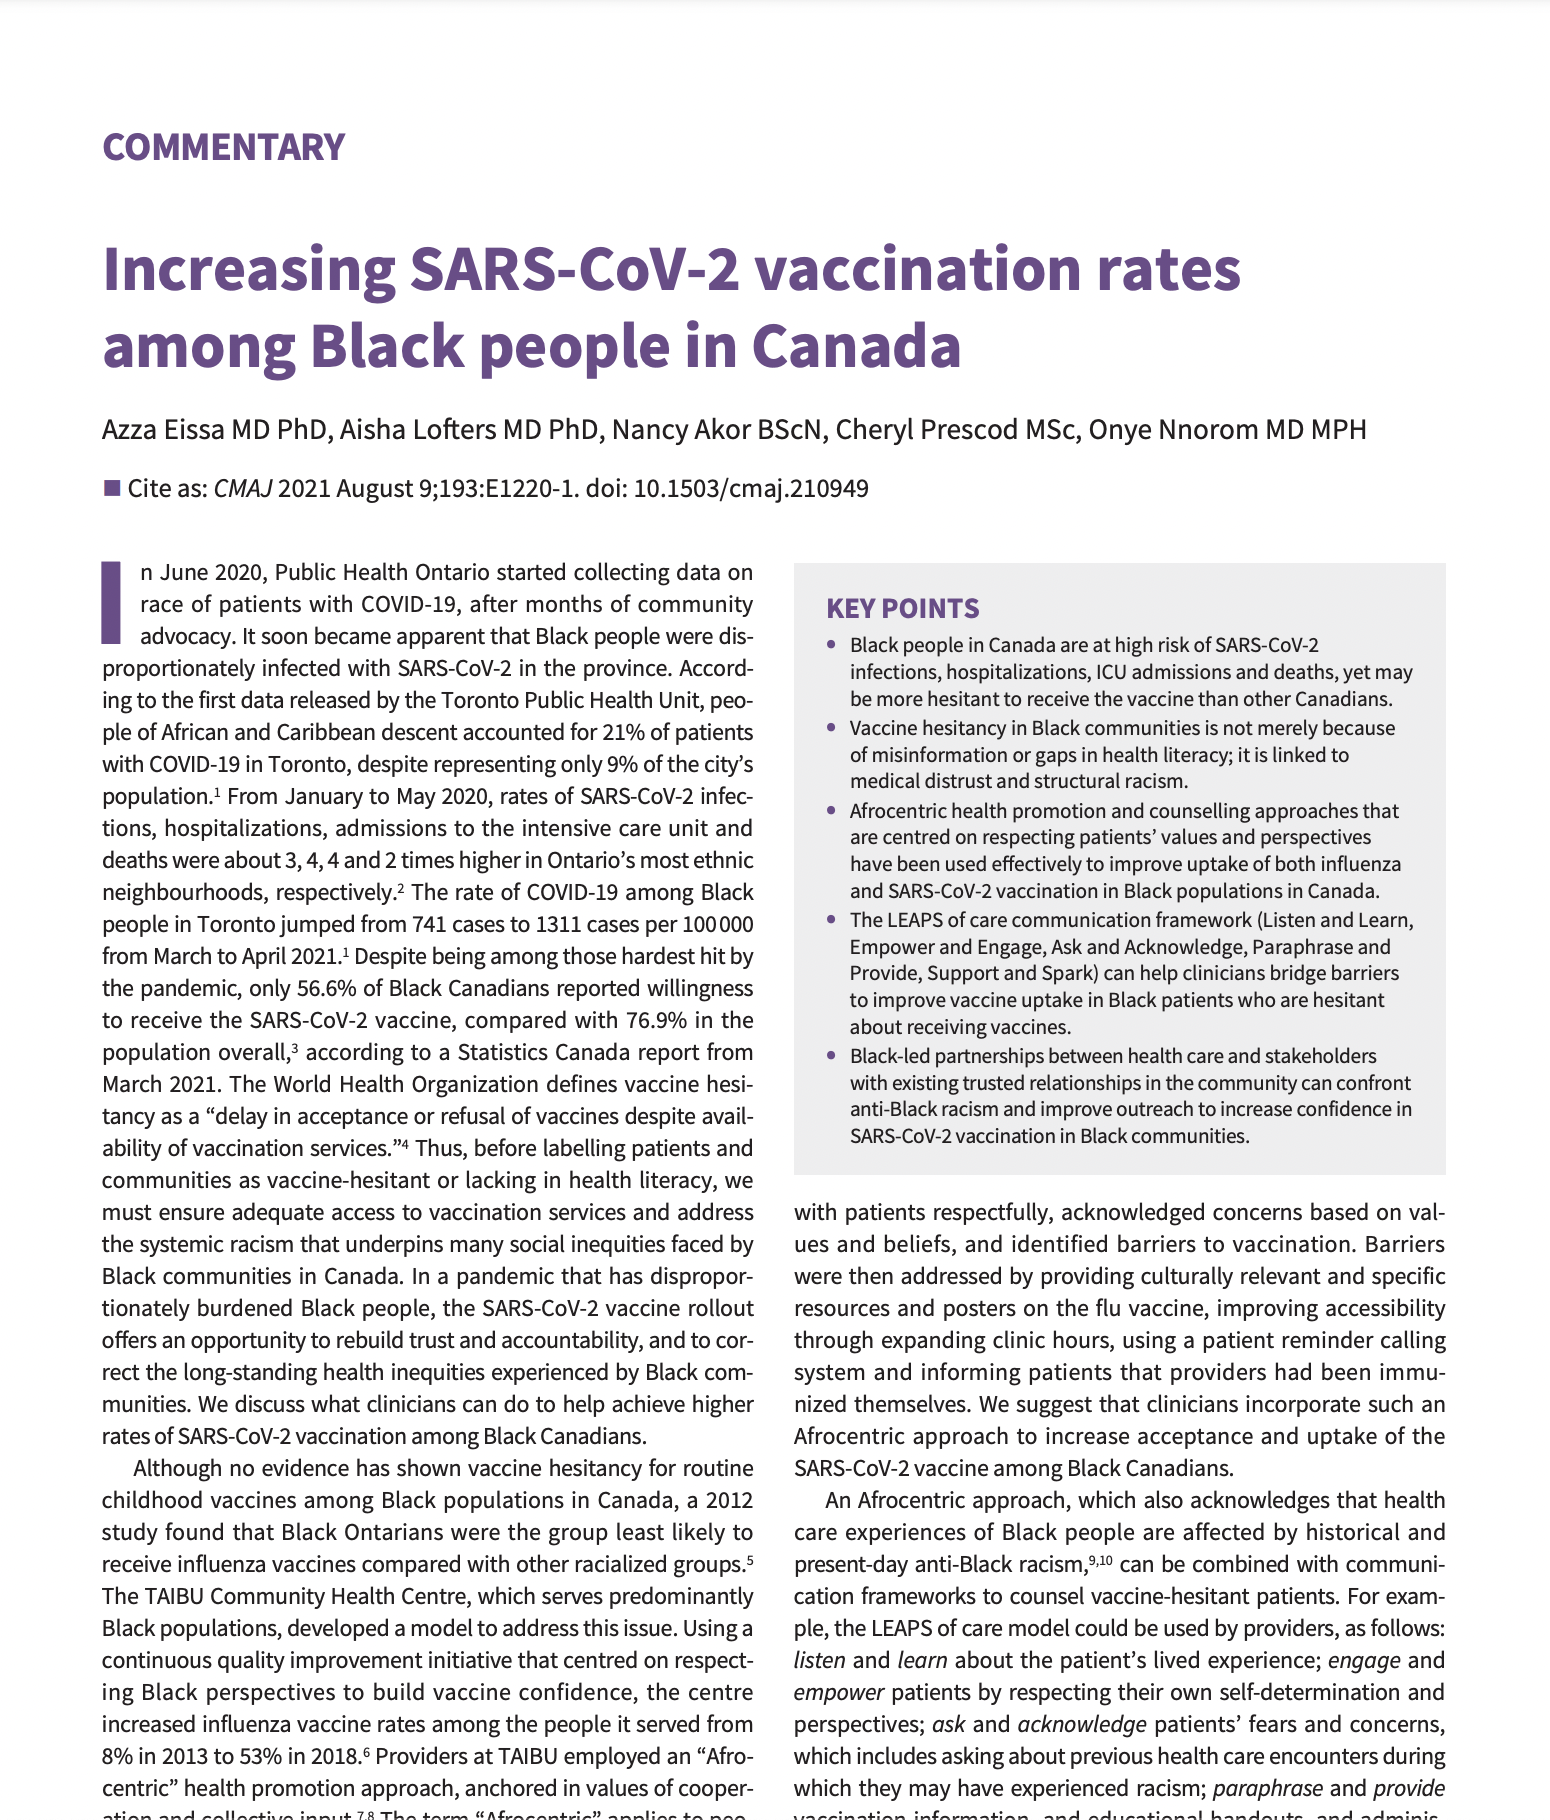 Increasing SARS-CoV-2 vaccination rates among Black people in Canada